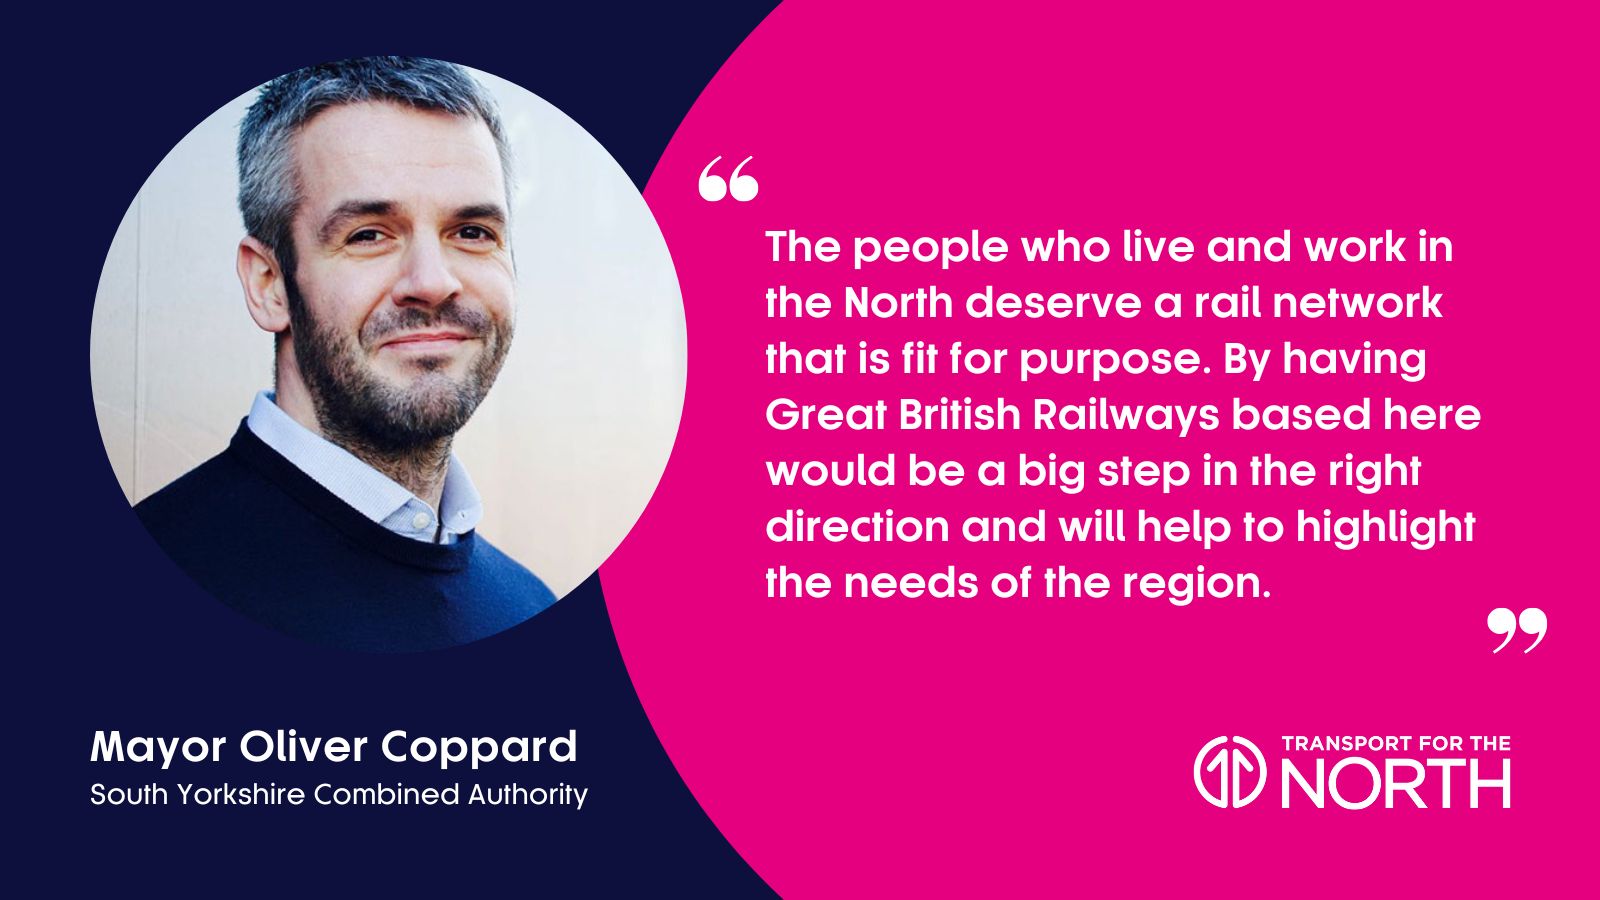 South Yorkshire Mayor Oliver Coppard says Great British Railways' HQ should be in Doncaster